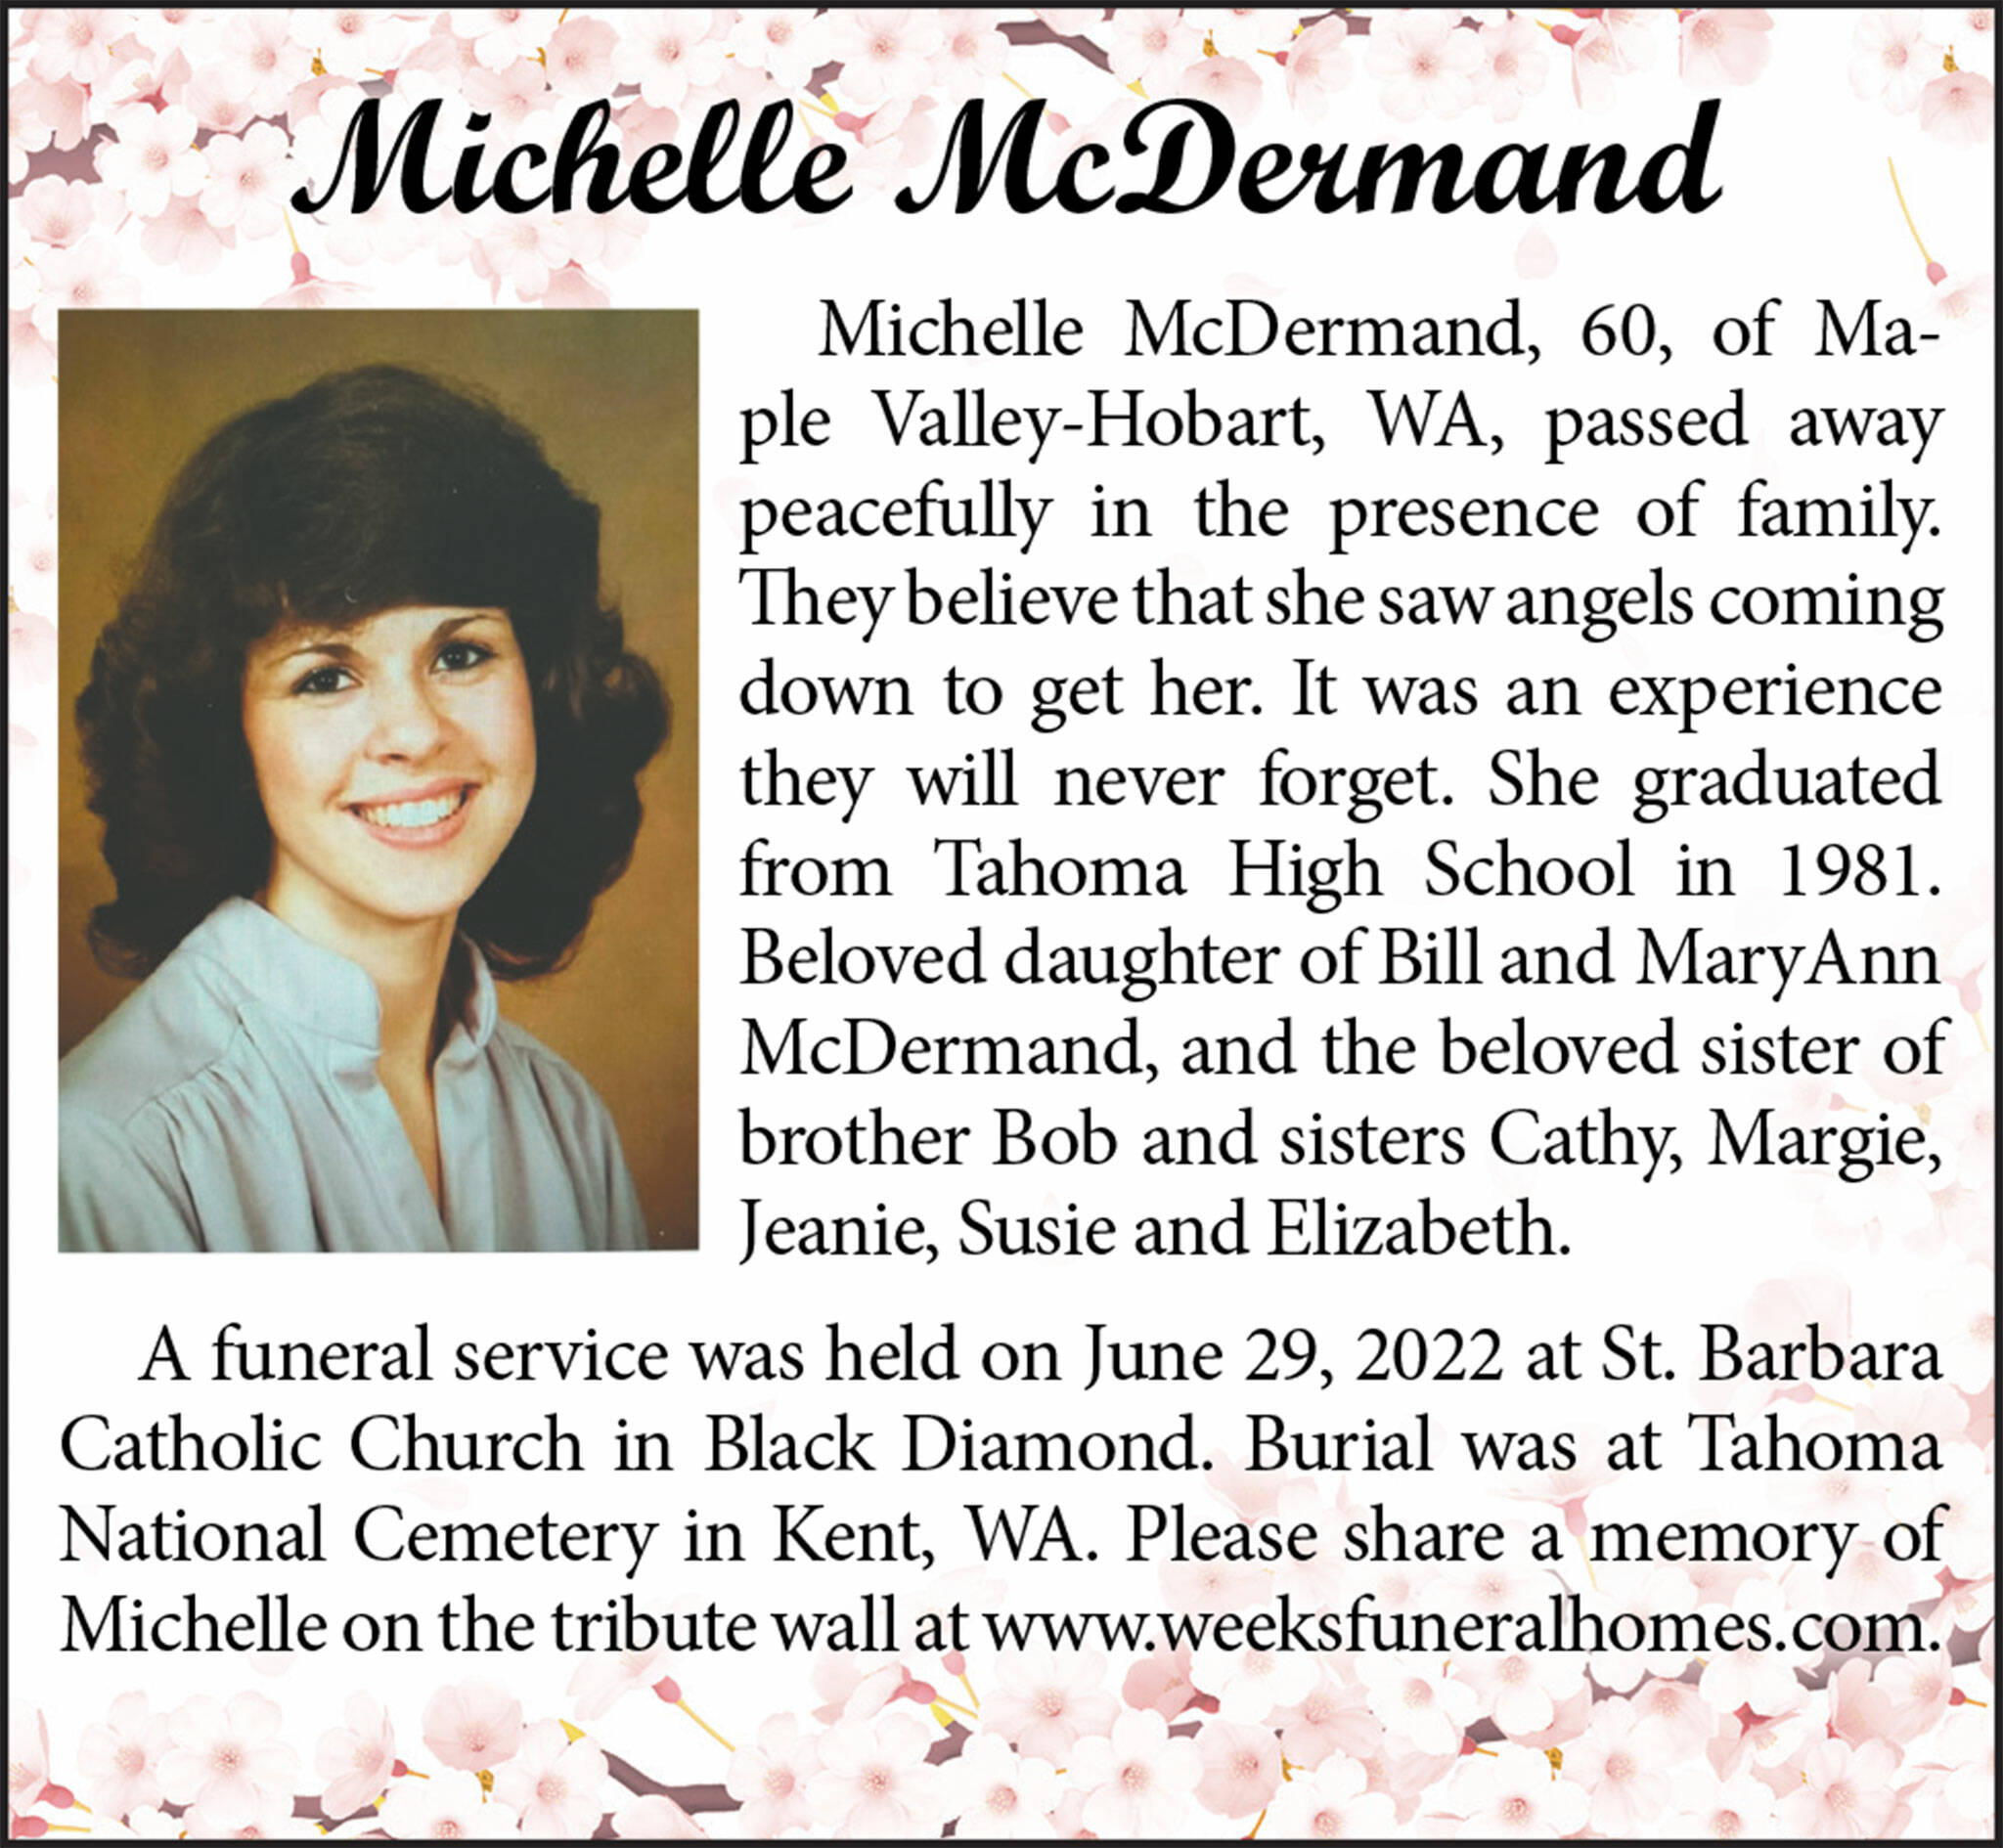 Michelle McDermand died at the age of 60. A funeral was held June 29.